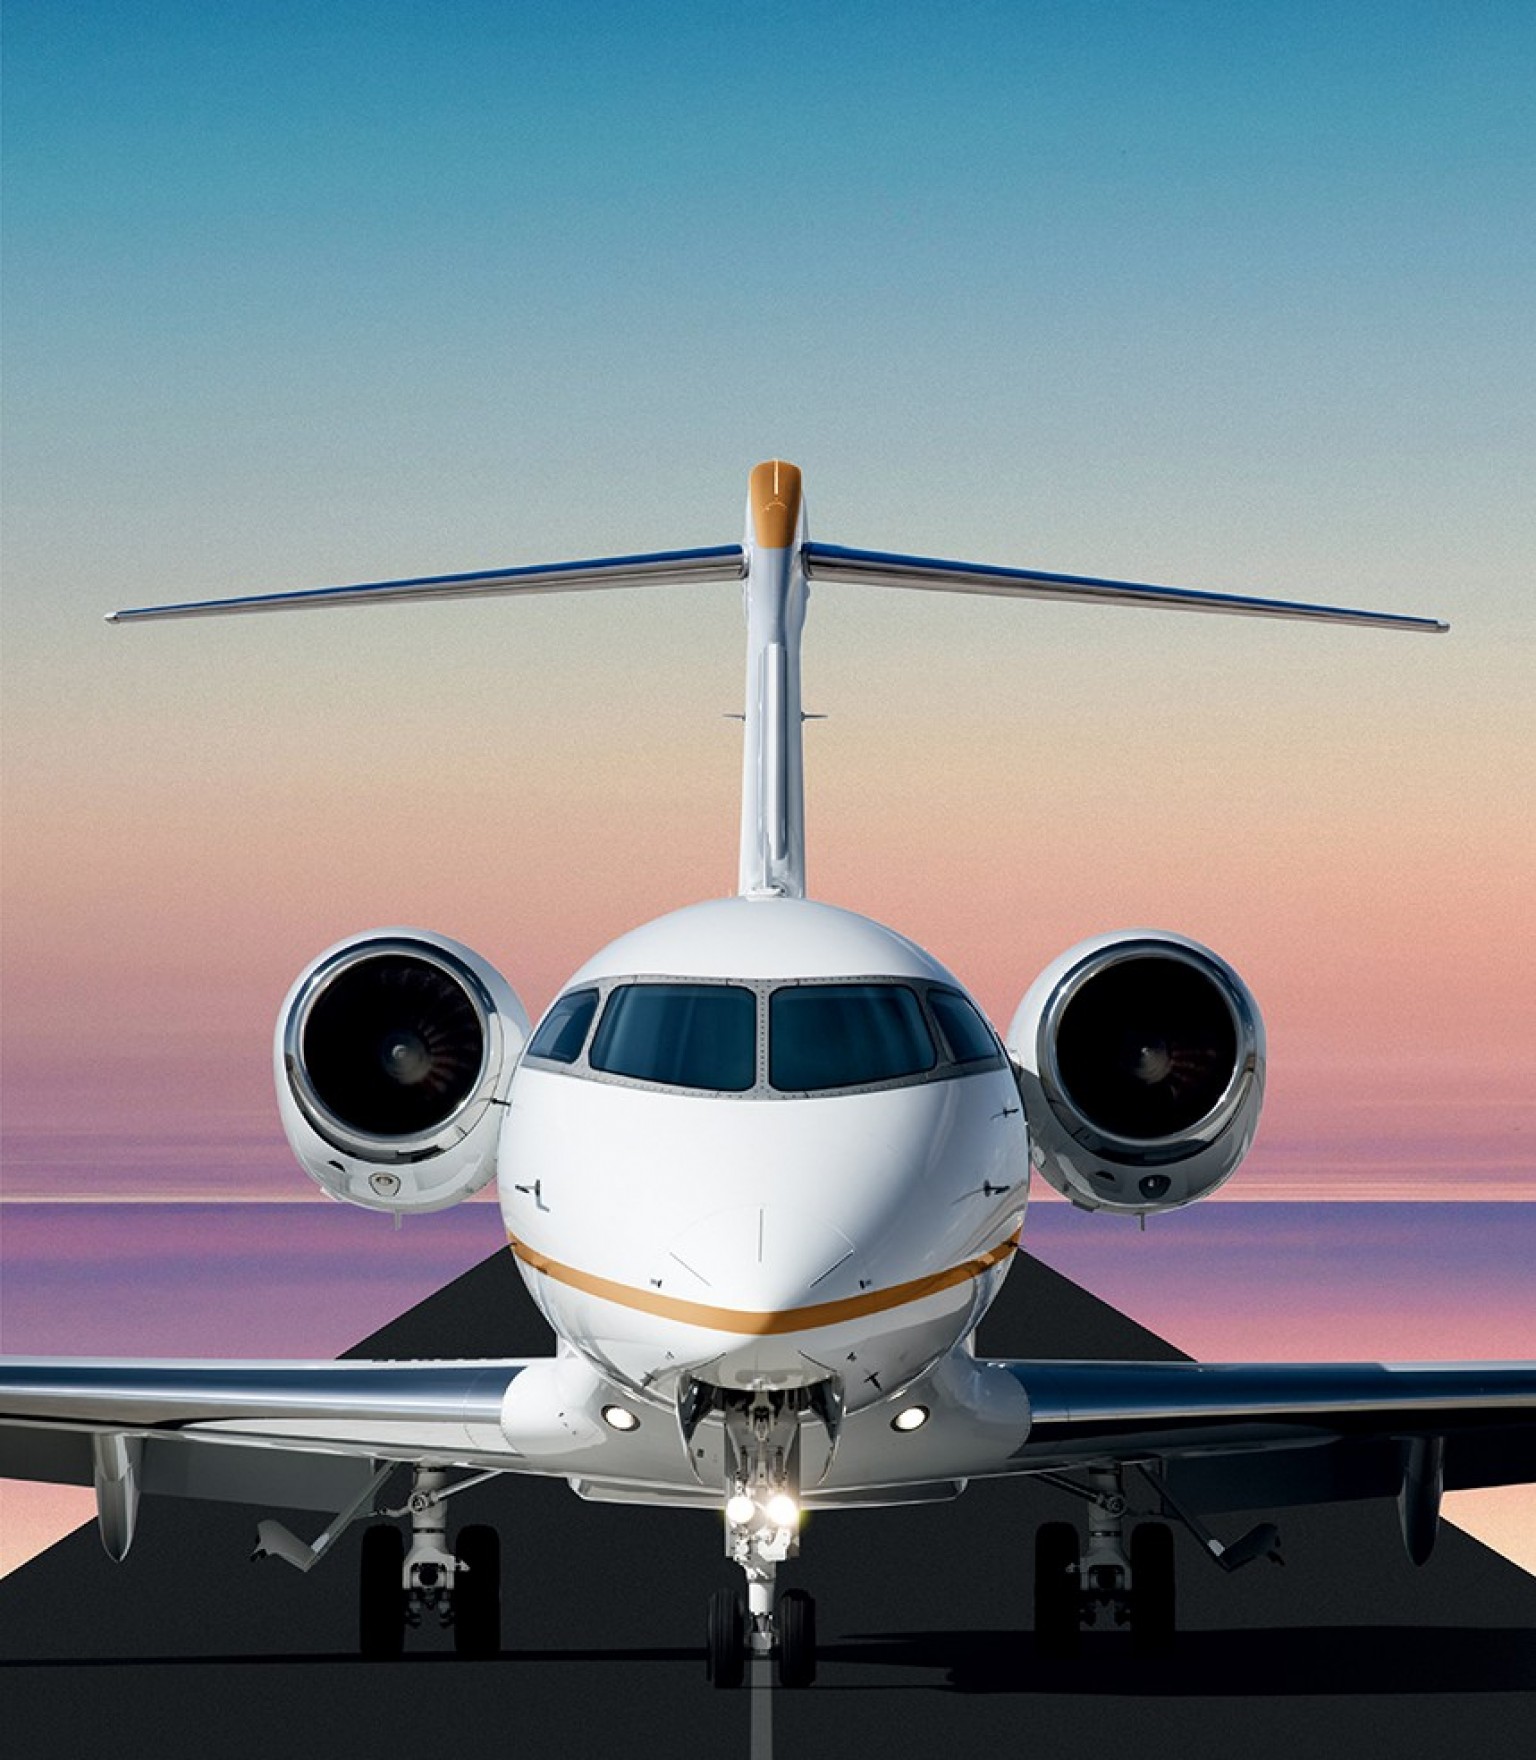 A close-up of the Challenger 350 aircraft